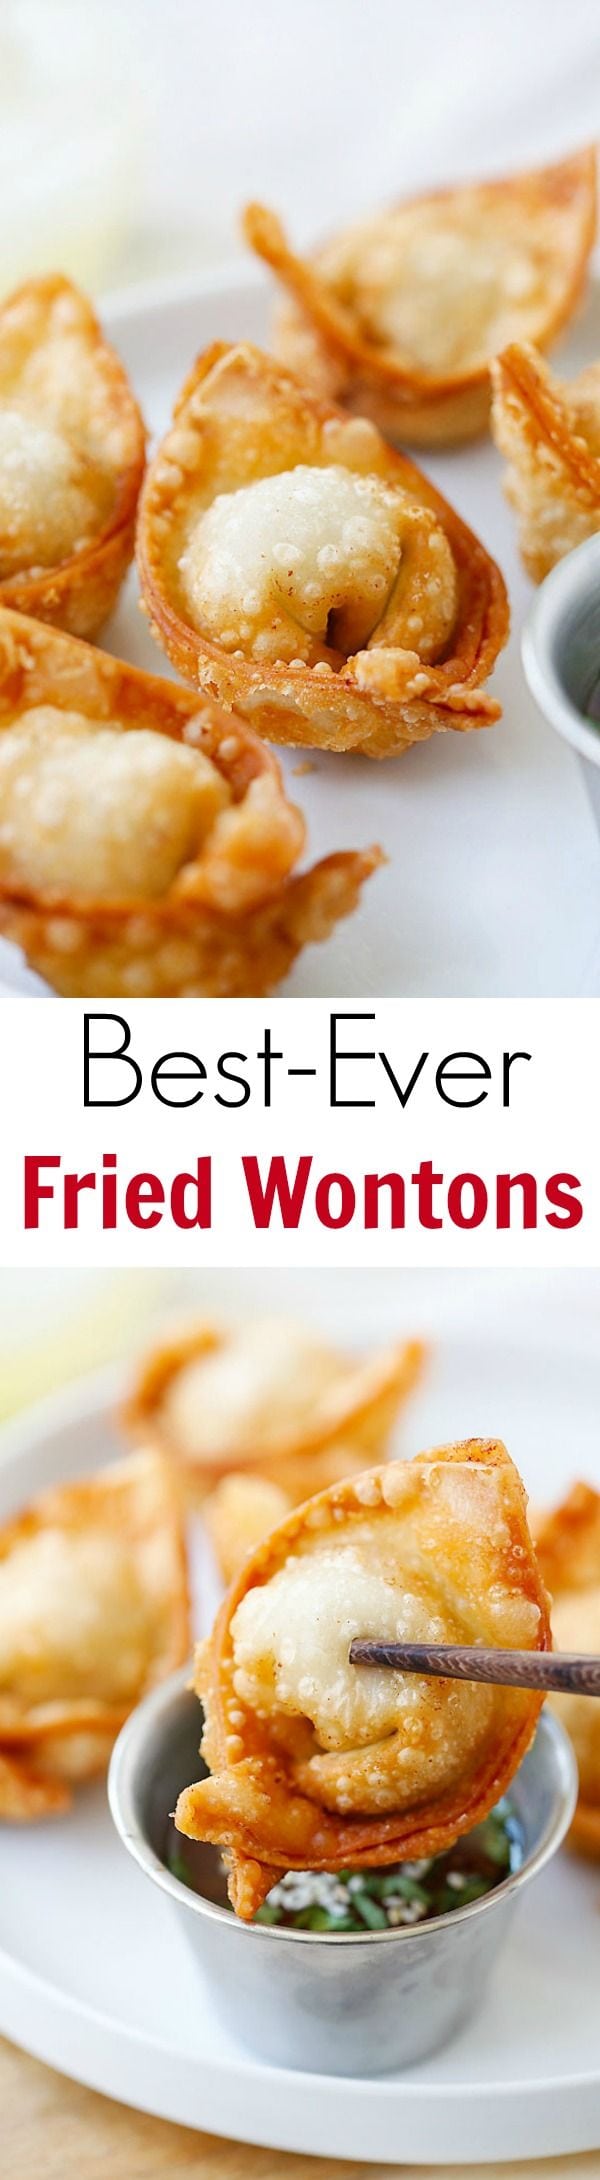 Fried wontons – BEST wontons recipe! Homemade, crispy, simple ingredients. Learn how to make wontons with this easy Chinese recipe | rasamalaysia.com